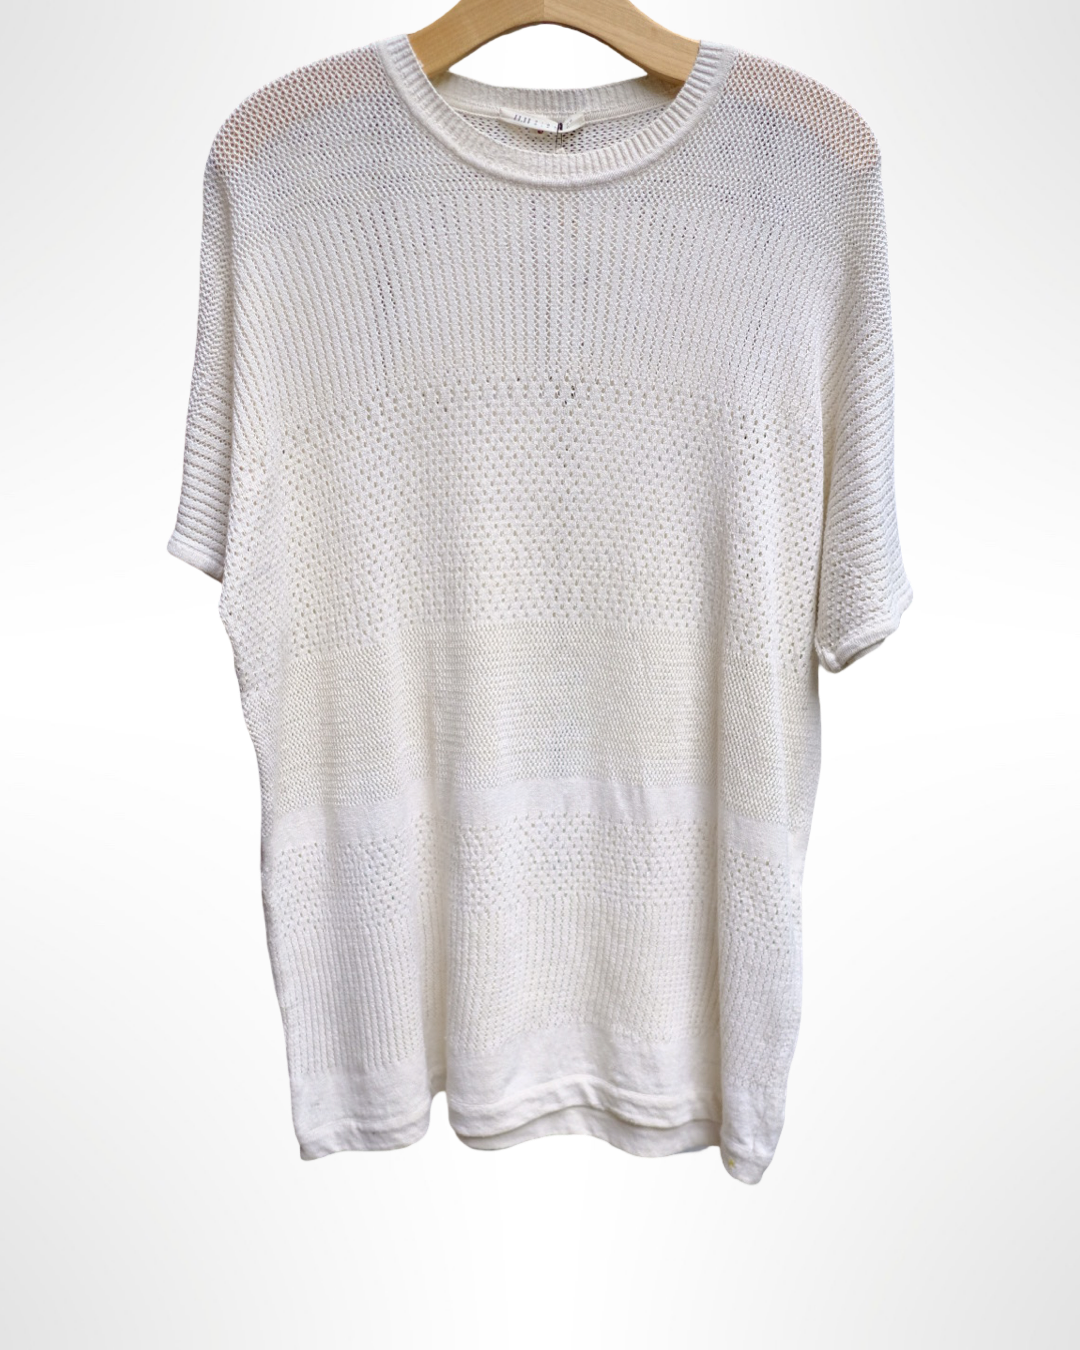 undyed cotton relaxed fit t-shirt knitted w pattern